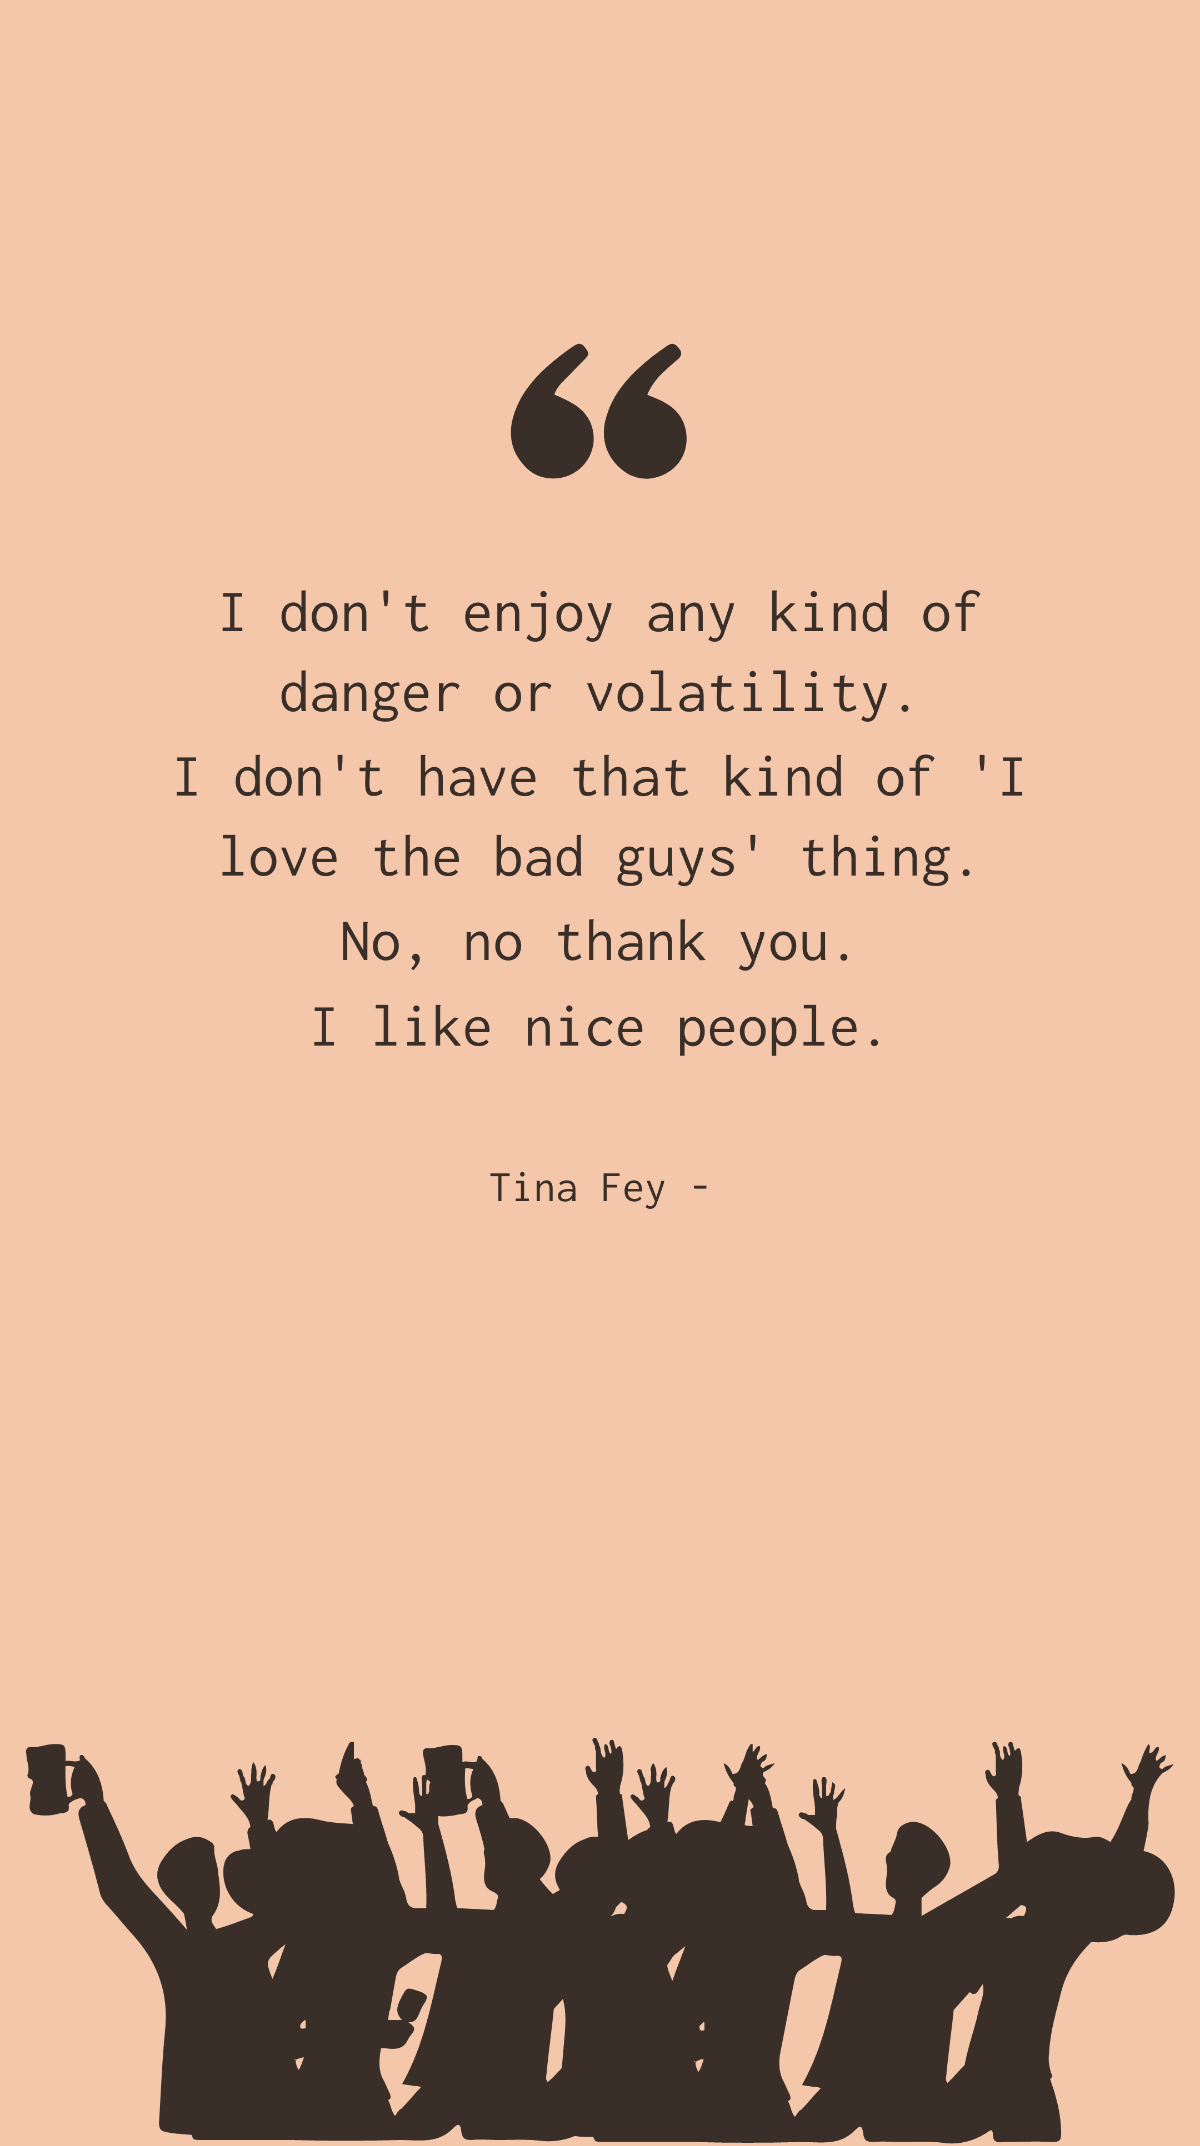 Tina Fey - I don't enjoy any kind of danger or volatility. I don't have that kind of 'I love the bad guys' thing. No, no thank you. I like nice people.